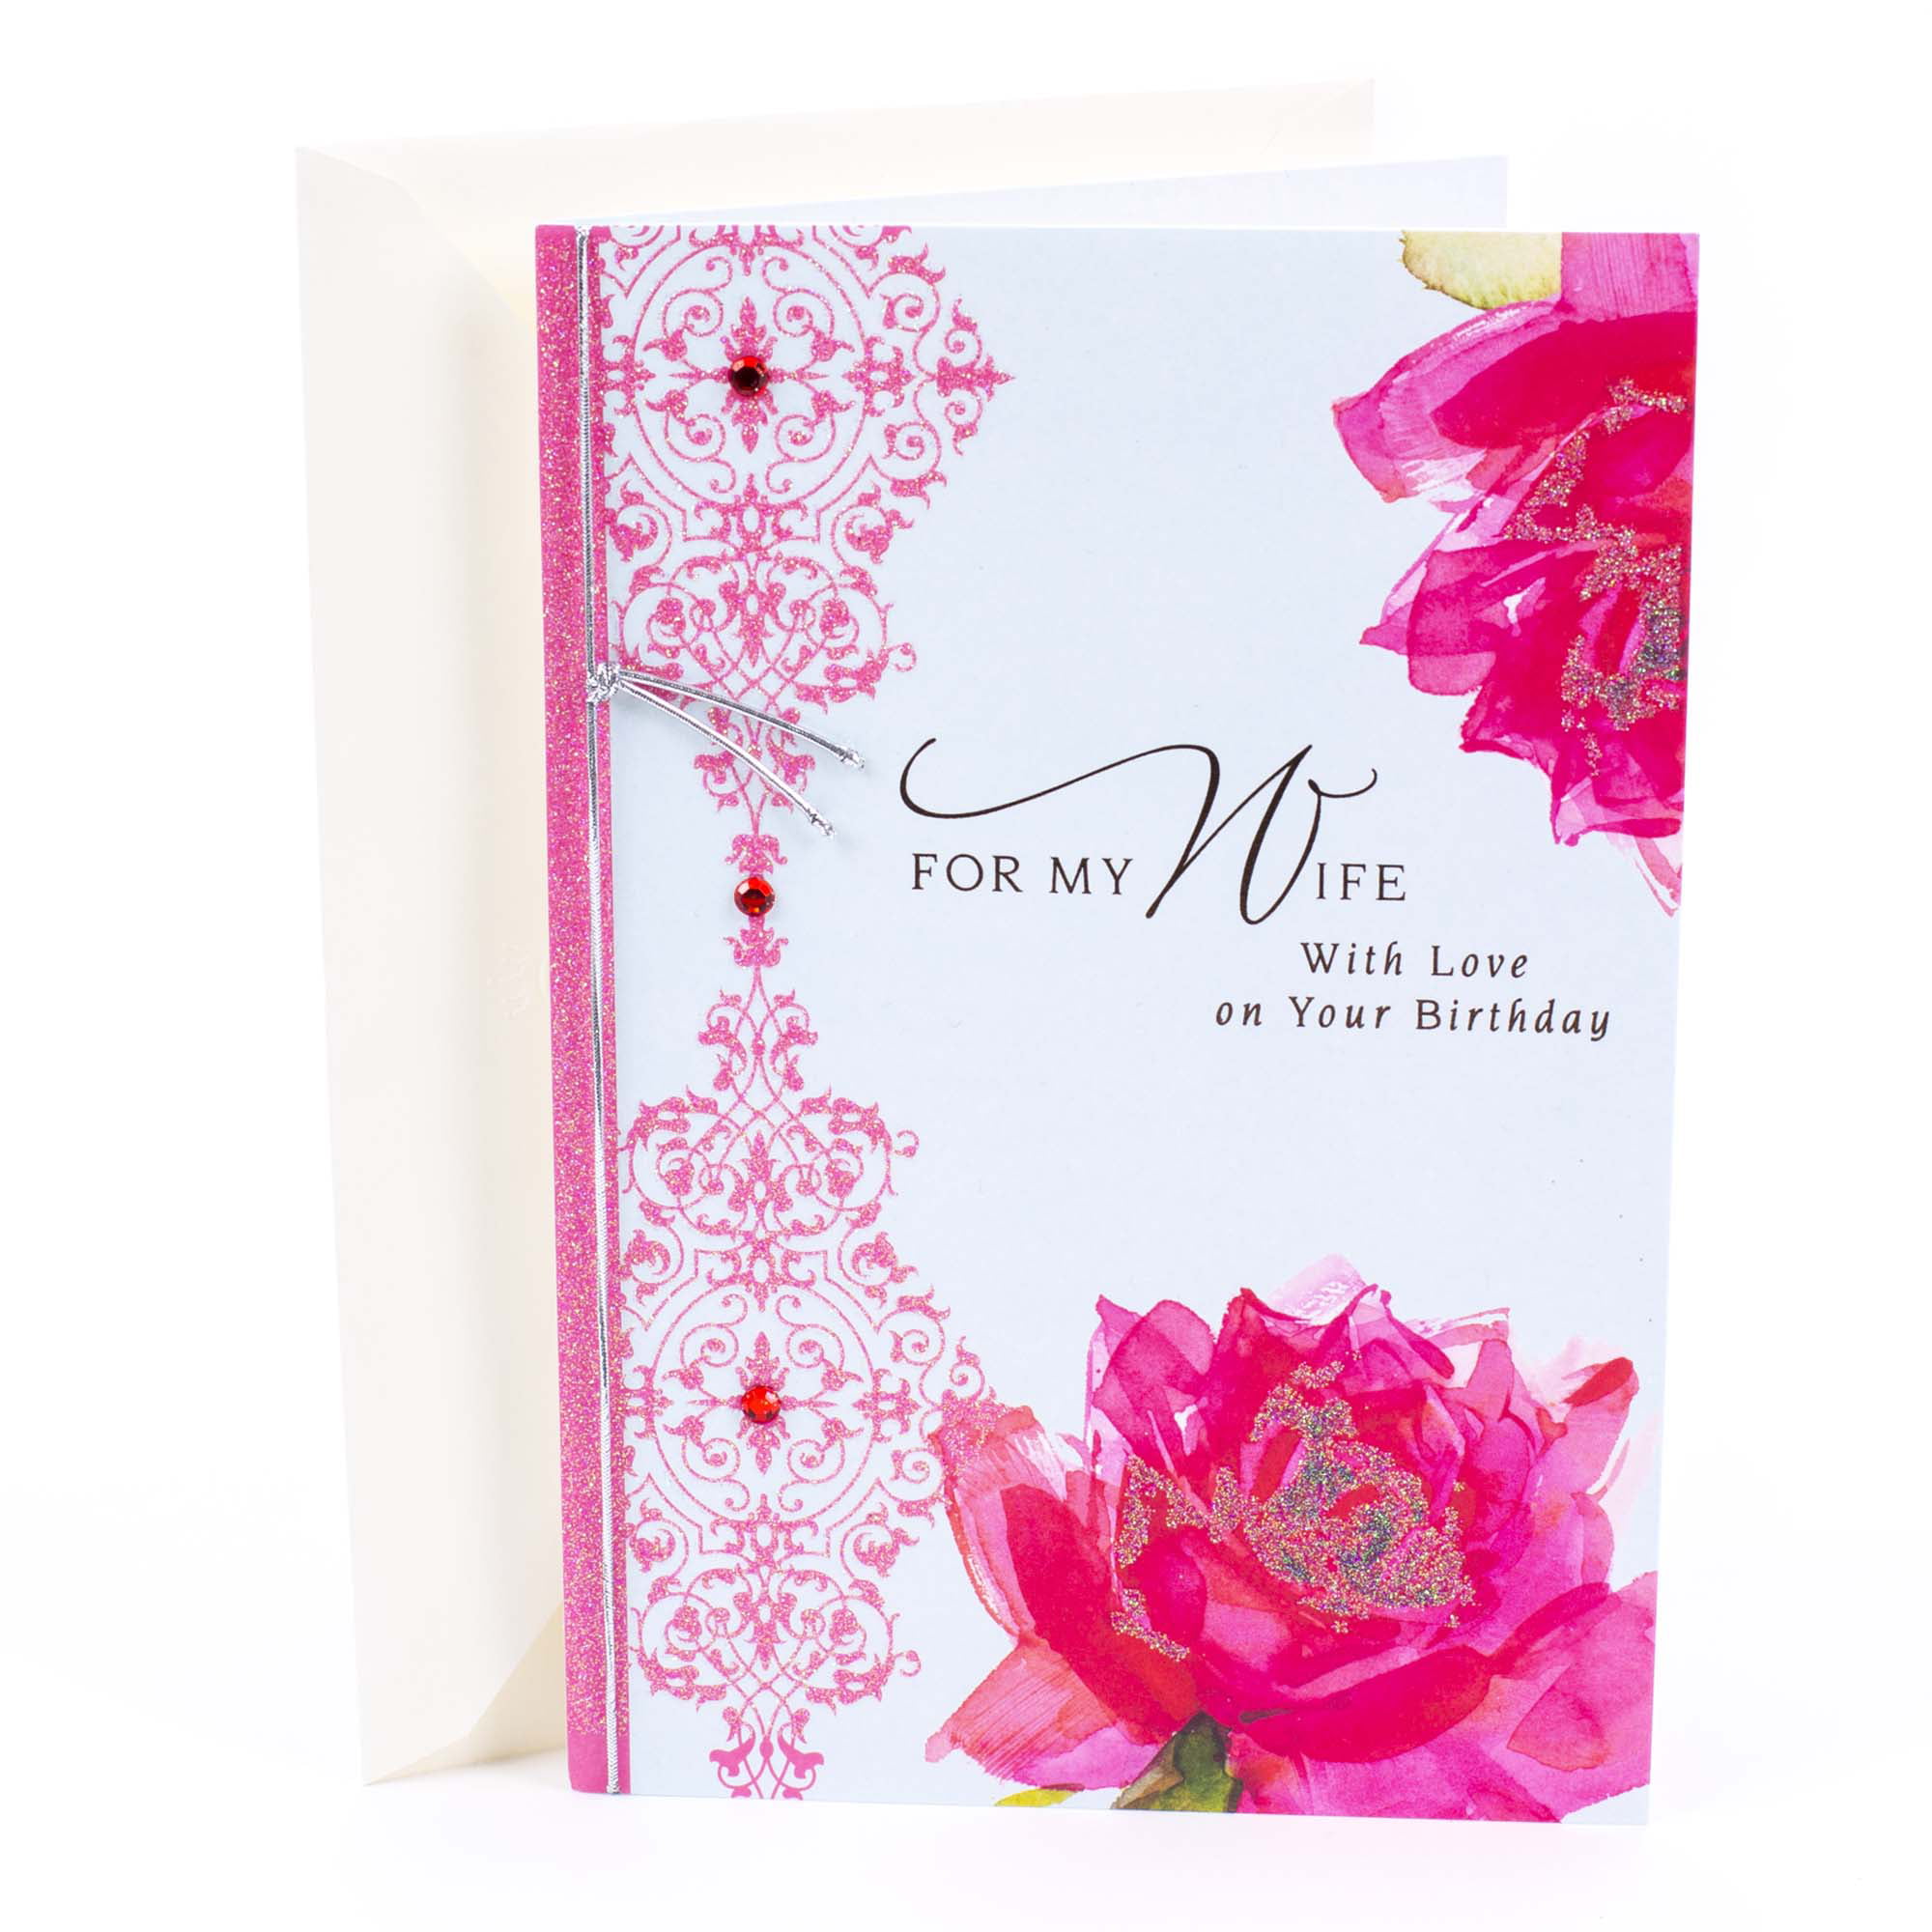 hallmark-roses-with-pattern-birthday-greeting-card-to-wife-walmart